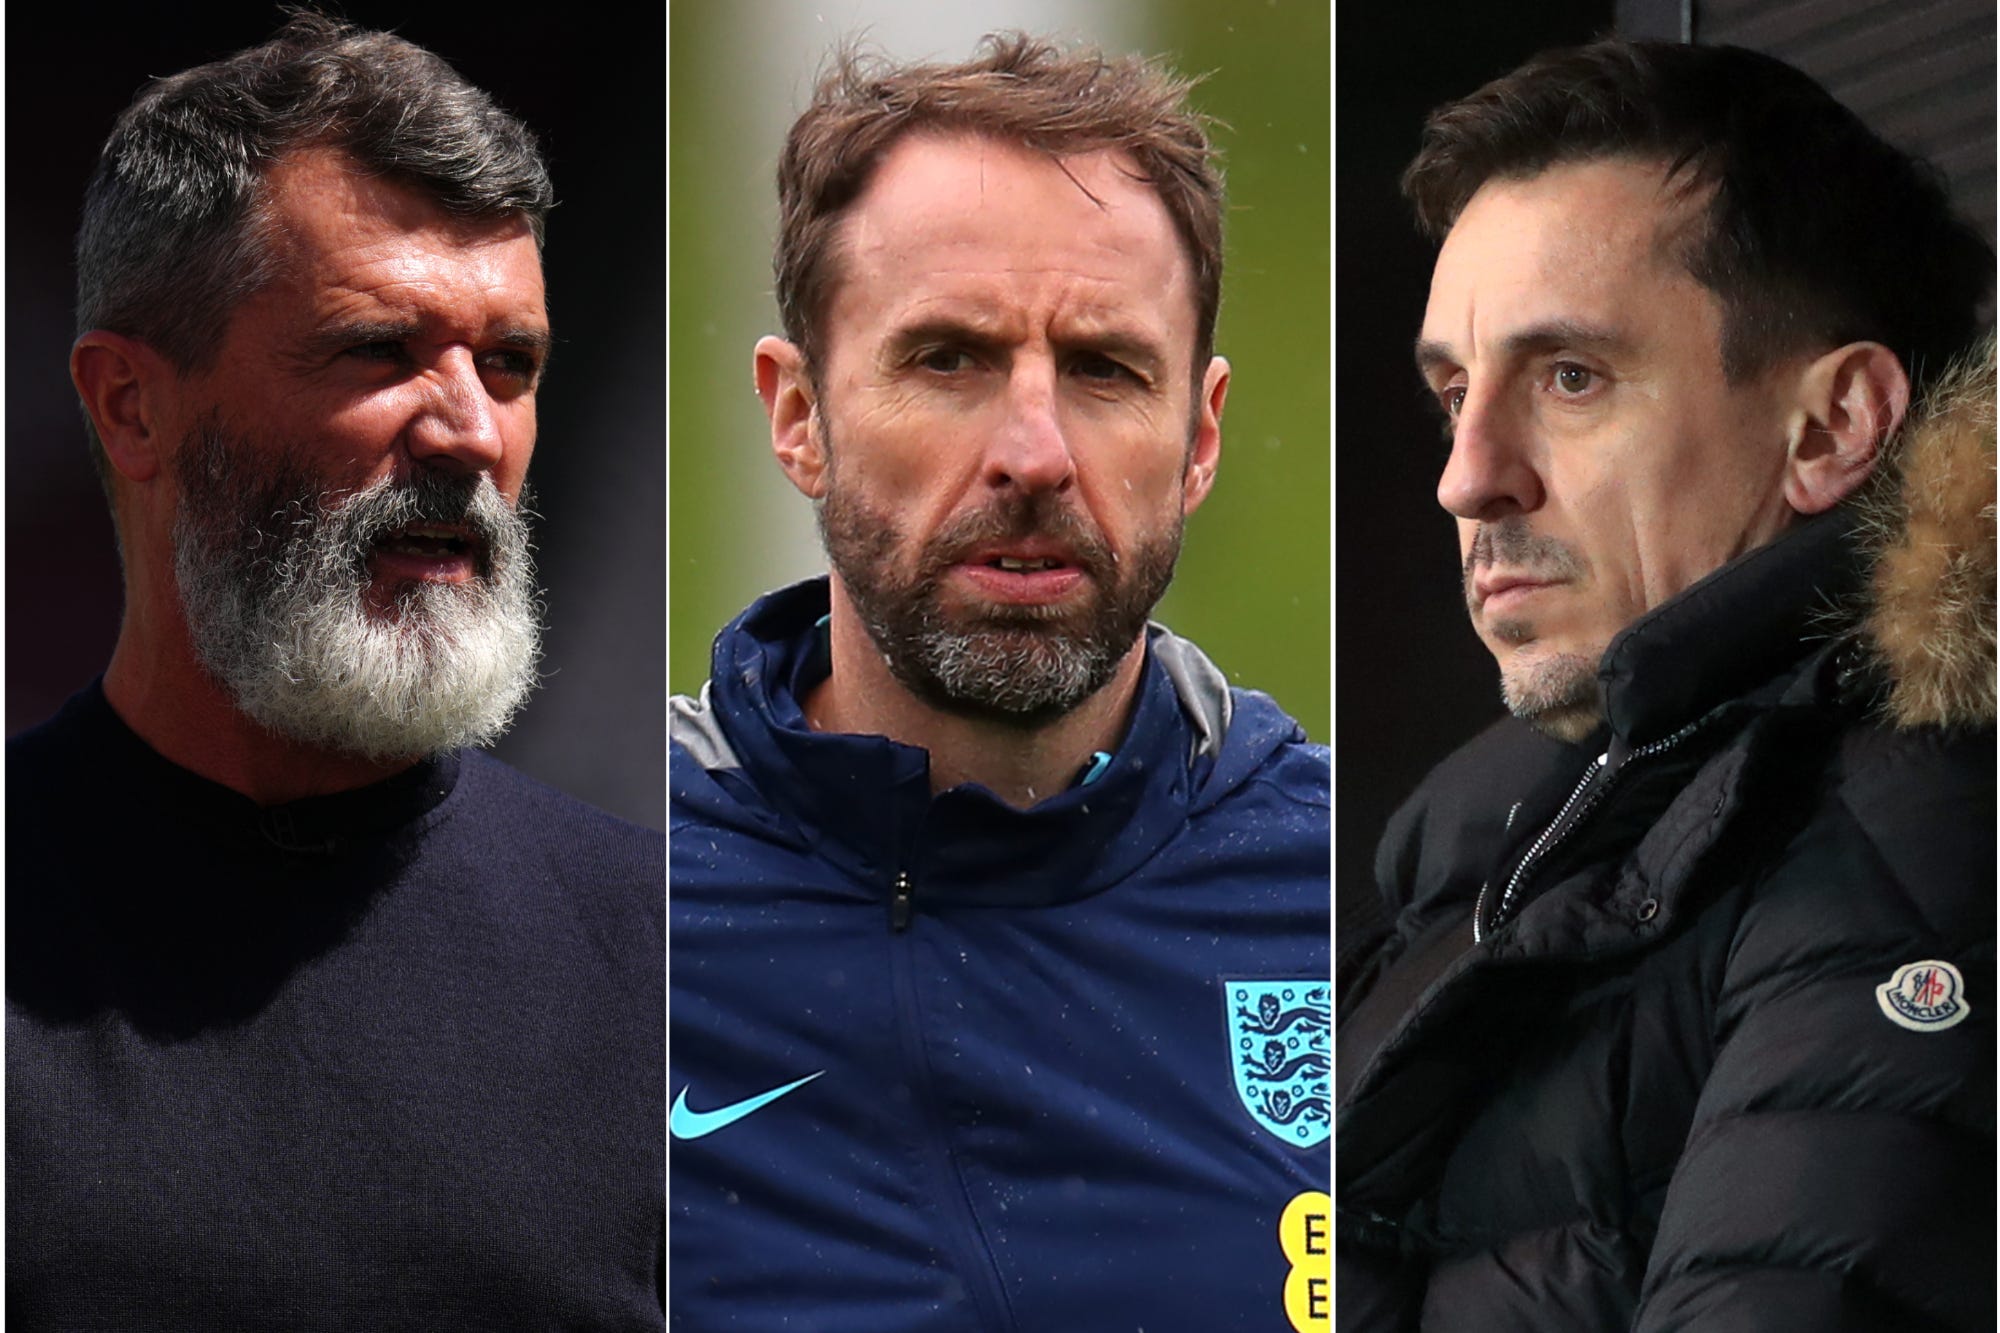 Gareth Southgate has been backed for the Manchester United job by Gary Neville and Roy Keane